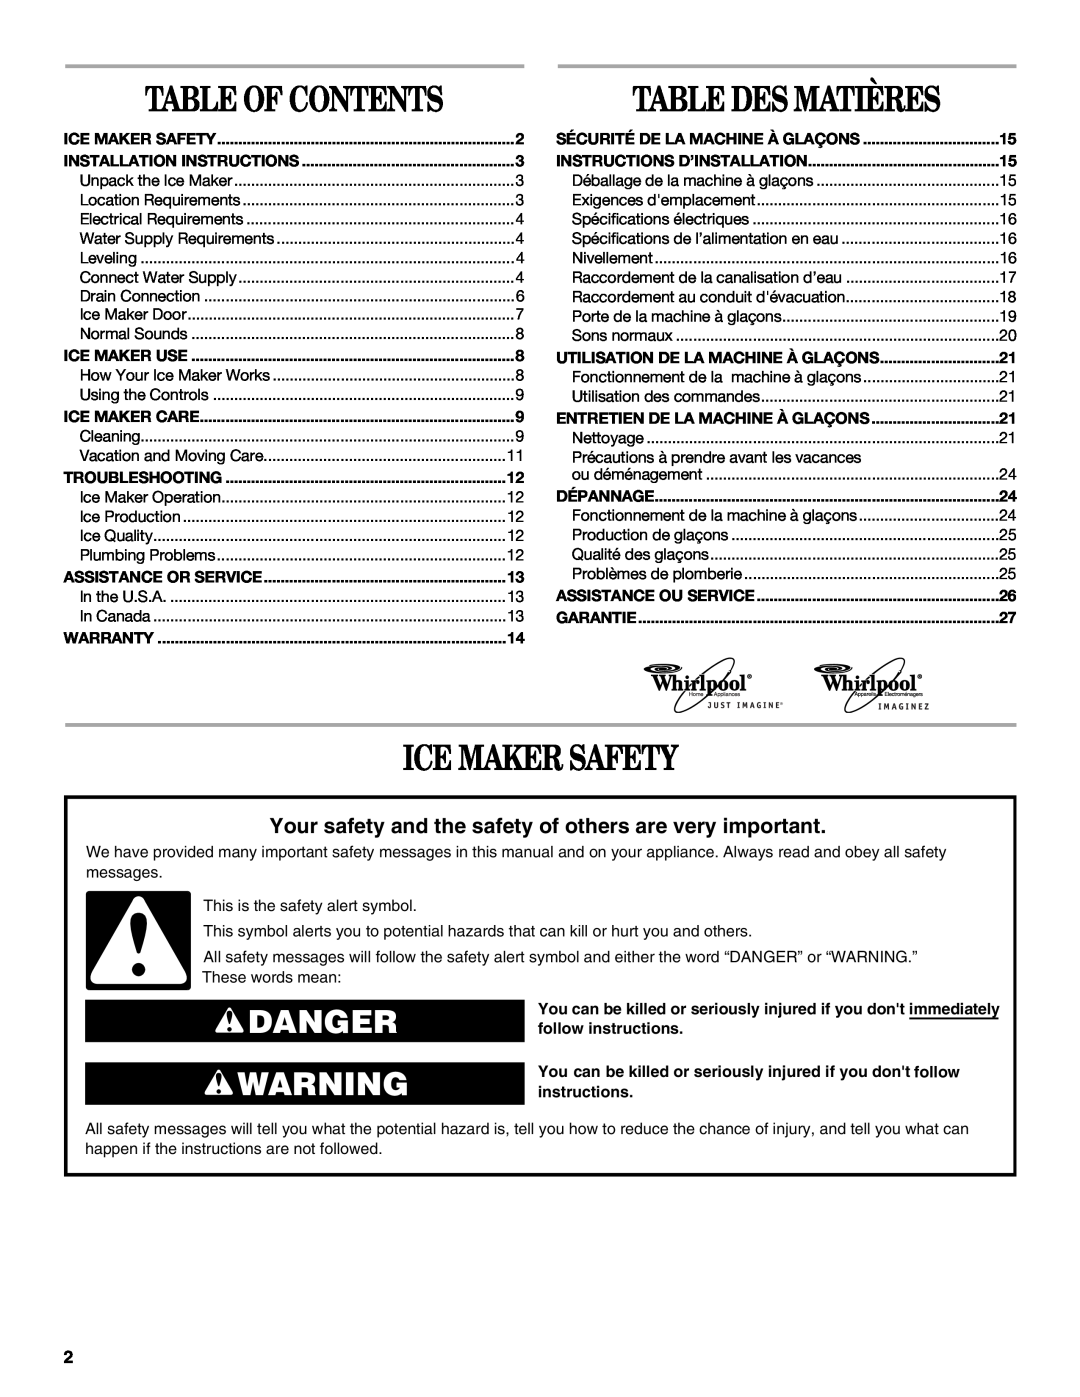 Whirlpool W10136155B Ice Maker Safety, Table Of Contents, Danger, Your safety and the safety of others are very important 